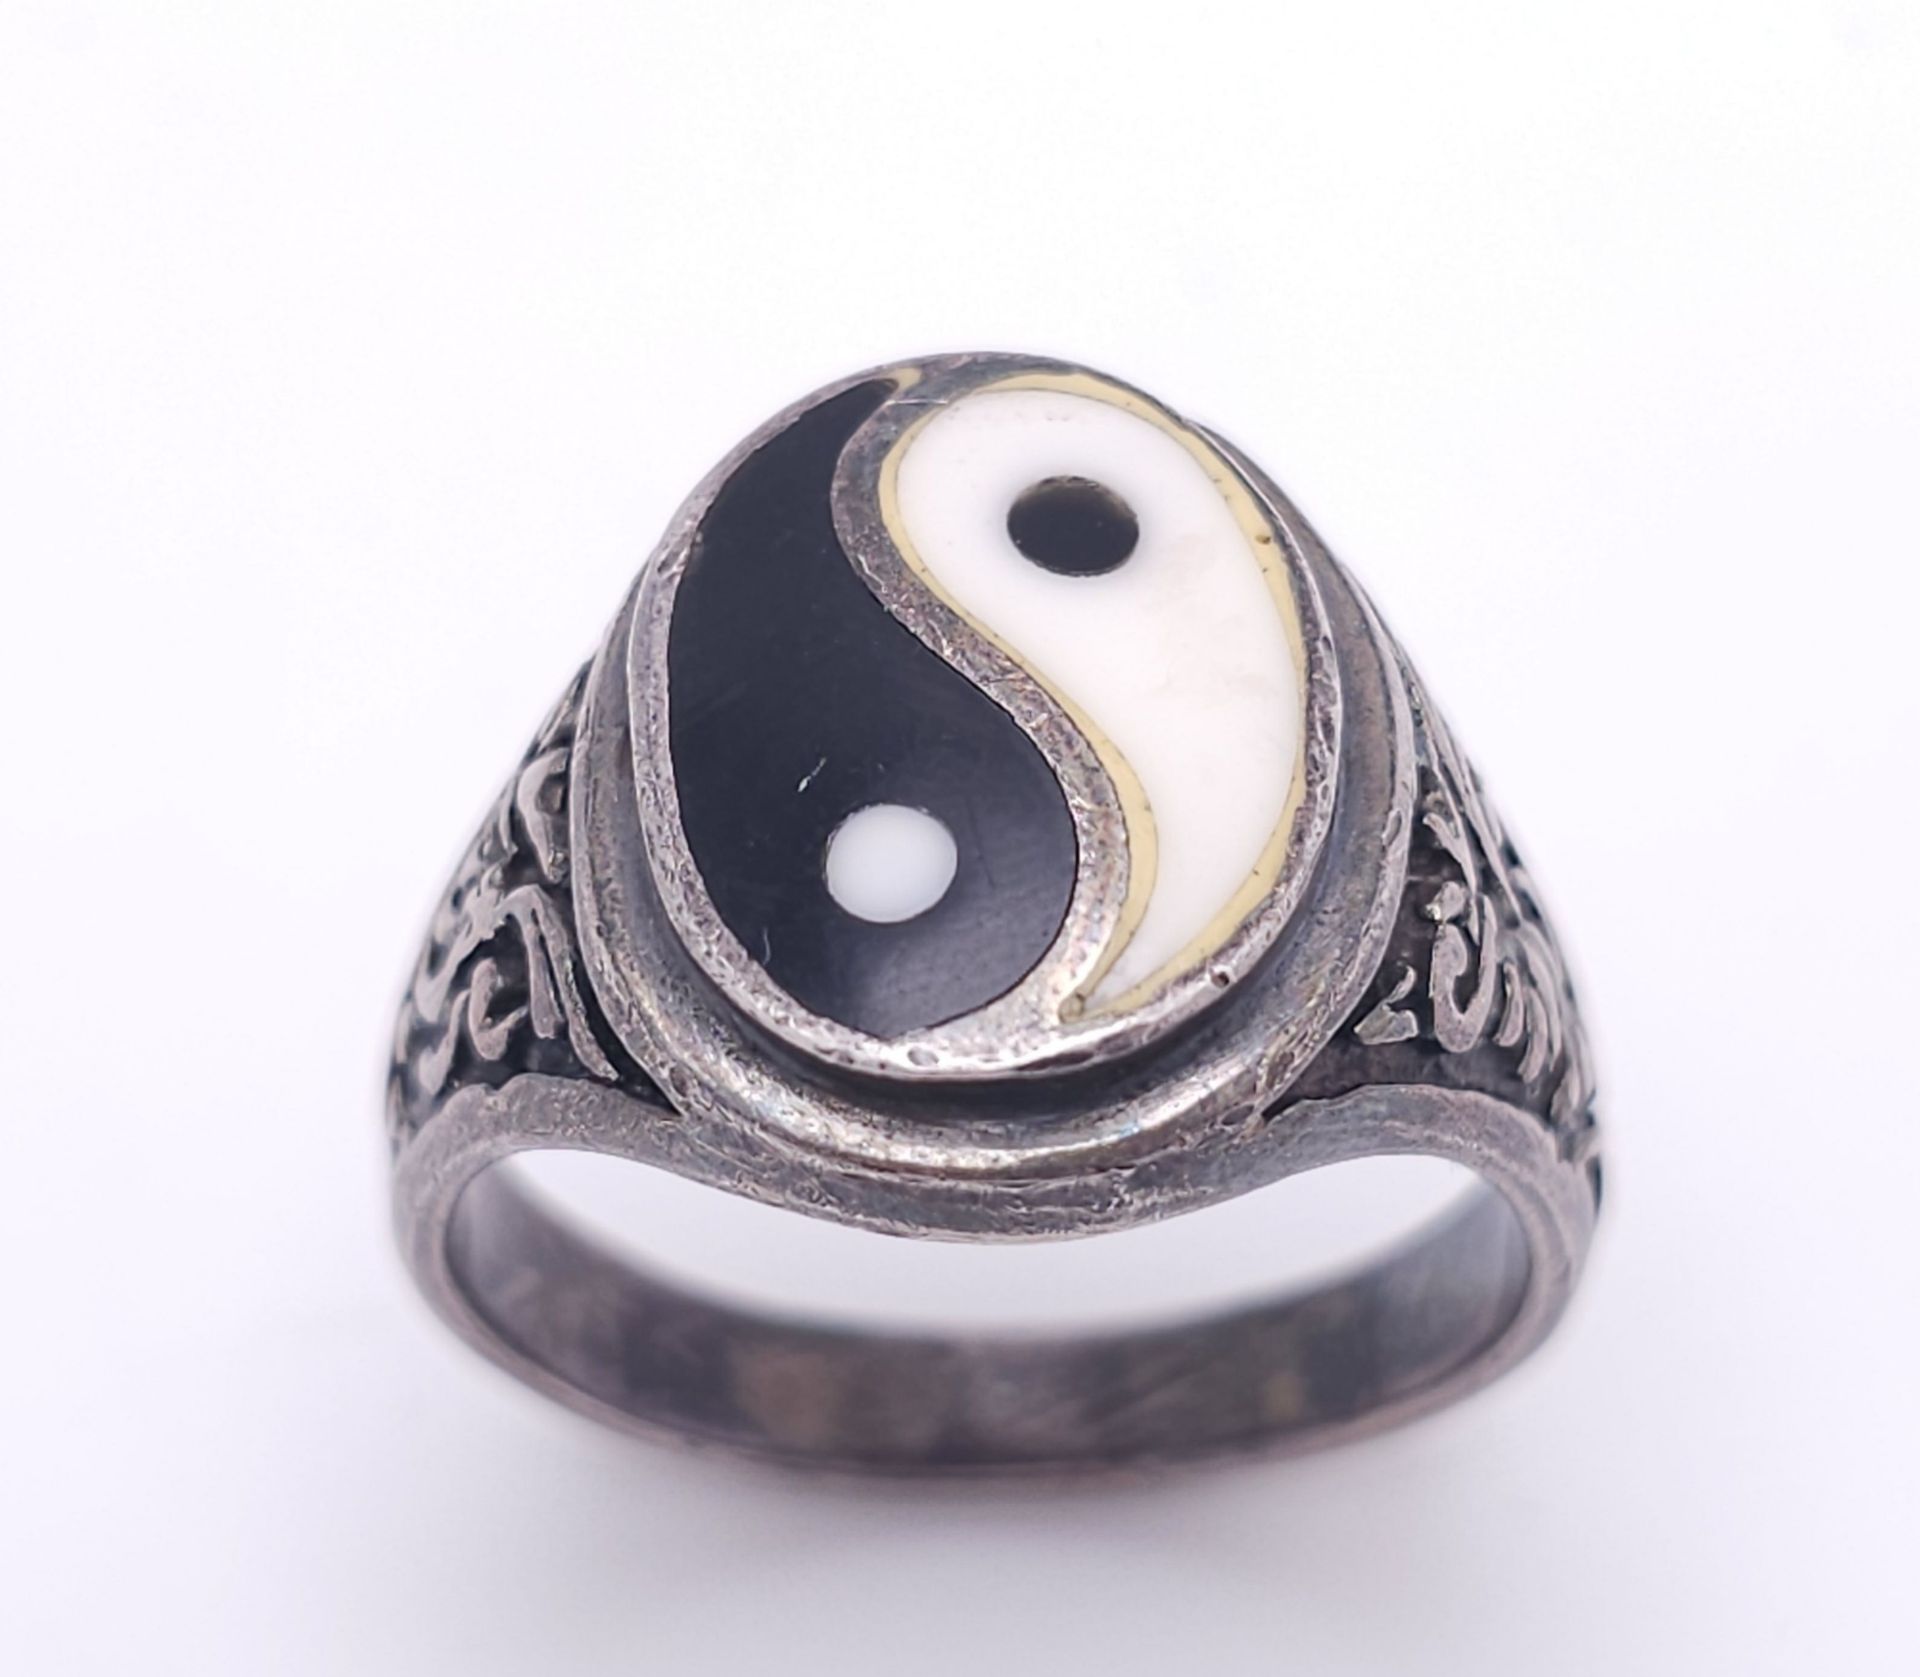 A vintage 925 silver Yin & Yang enamel ring with further decoration on shoulder. Total weight 12.4G. - Image 2 of 5